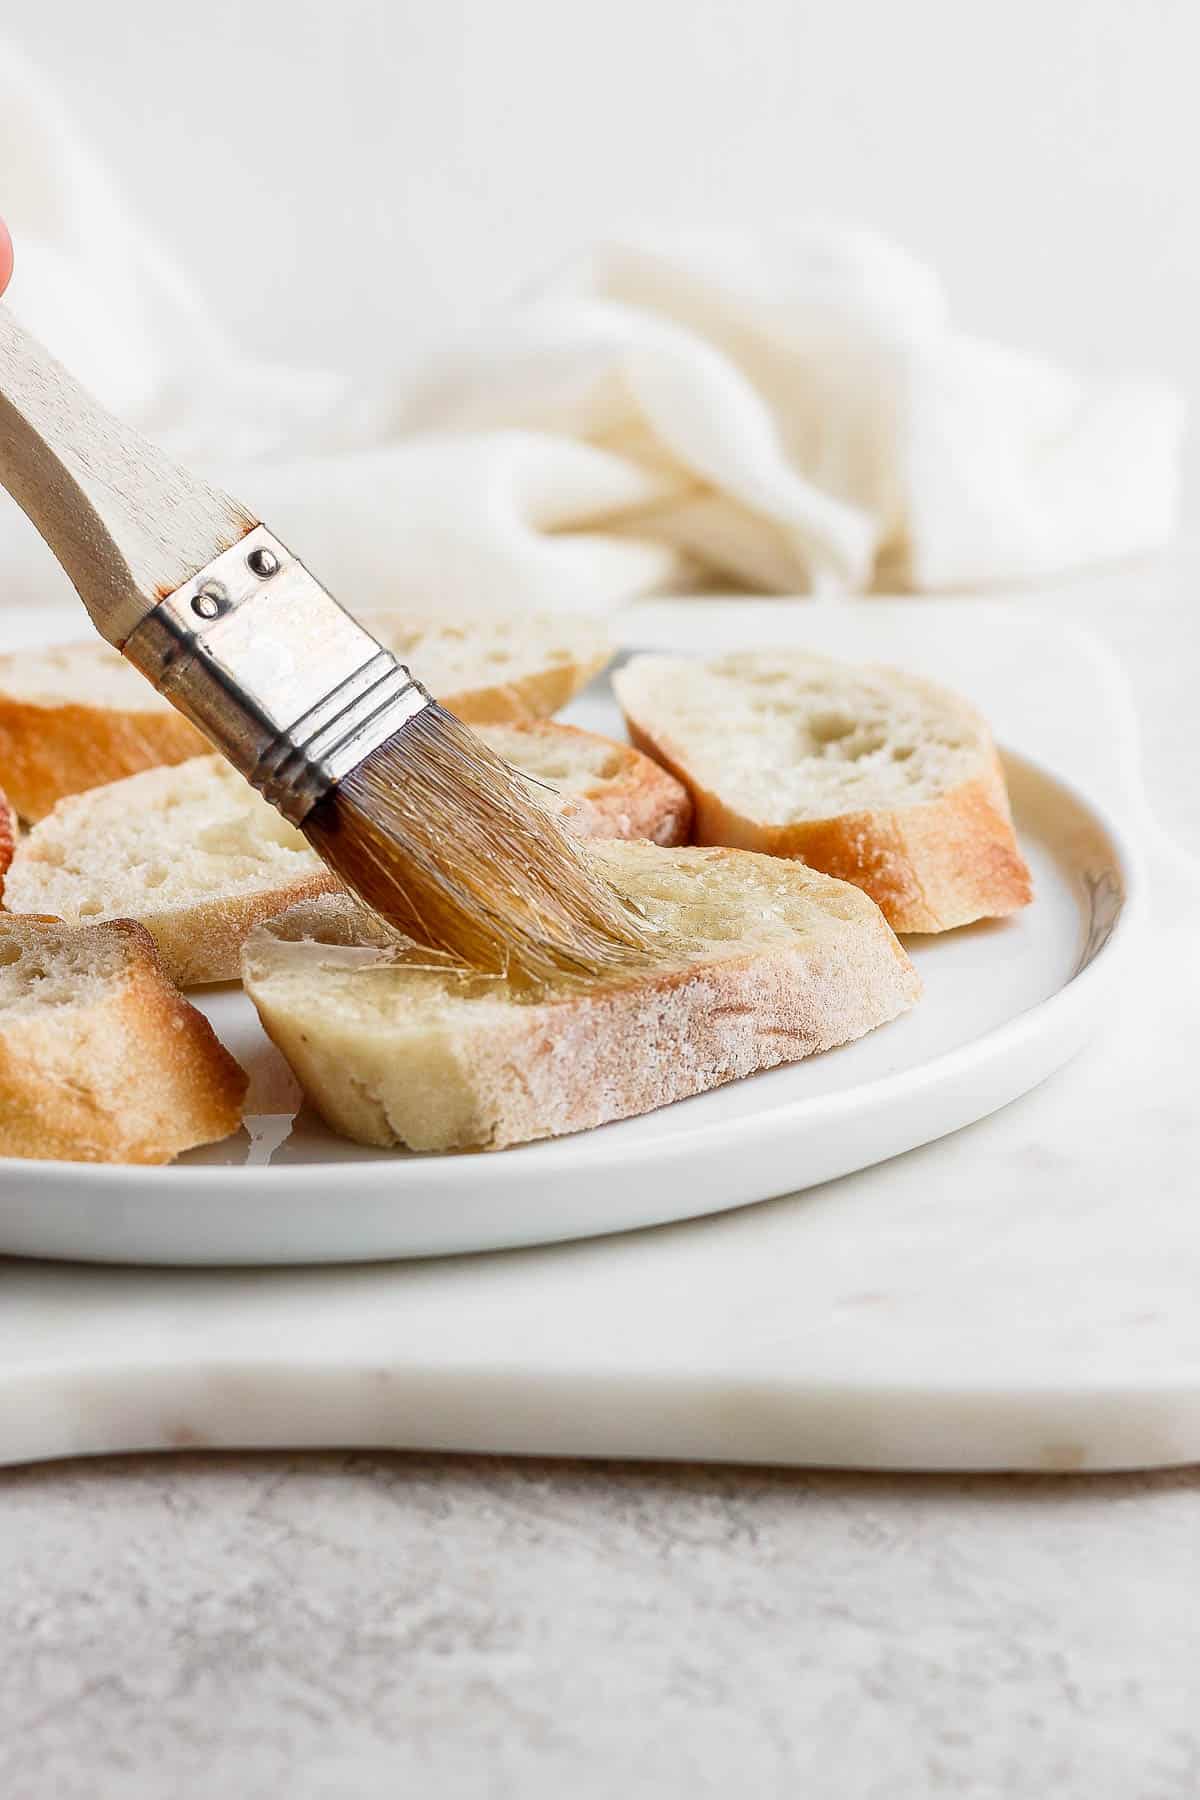 A basting brush that's brushing olive oil on a baguette slice.